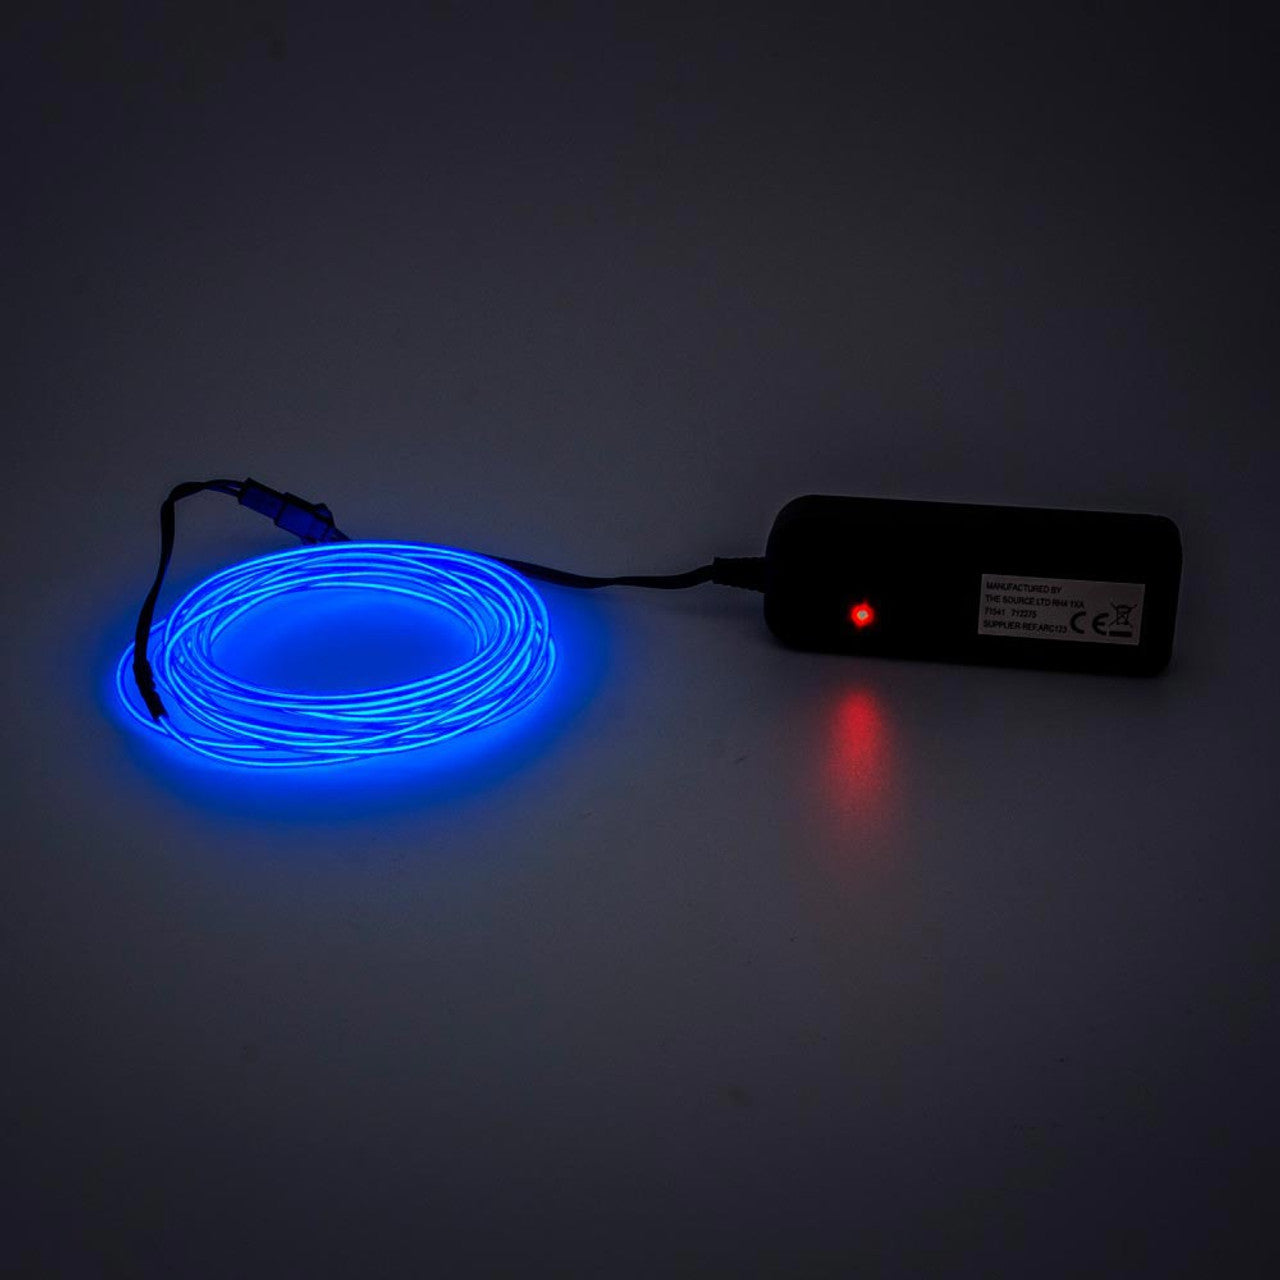 Multifunction Shape Your Own Neon Light - 3 Light Modes - TwoBeeps.co.uk